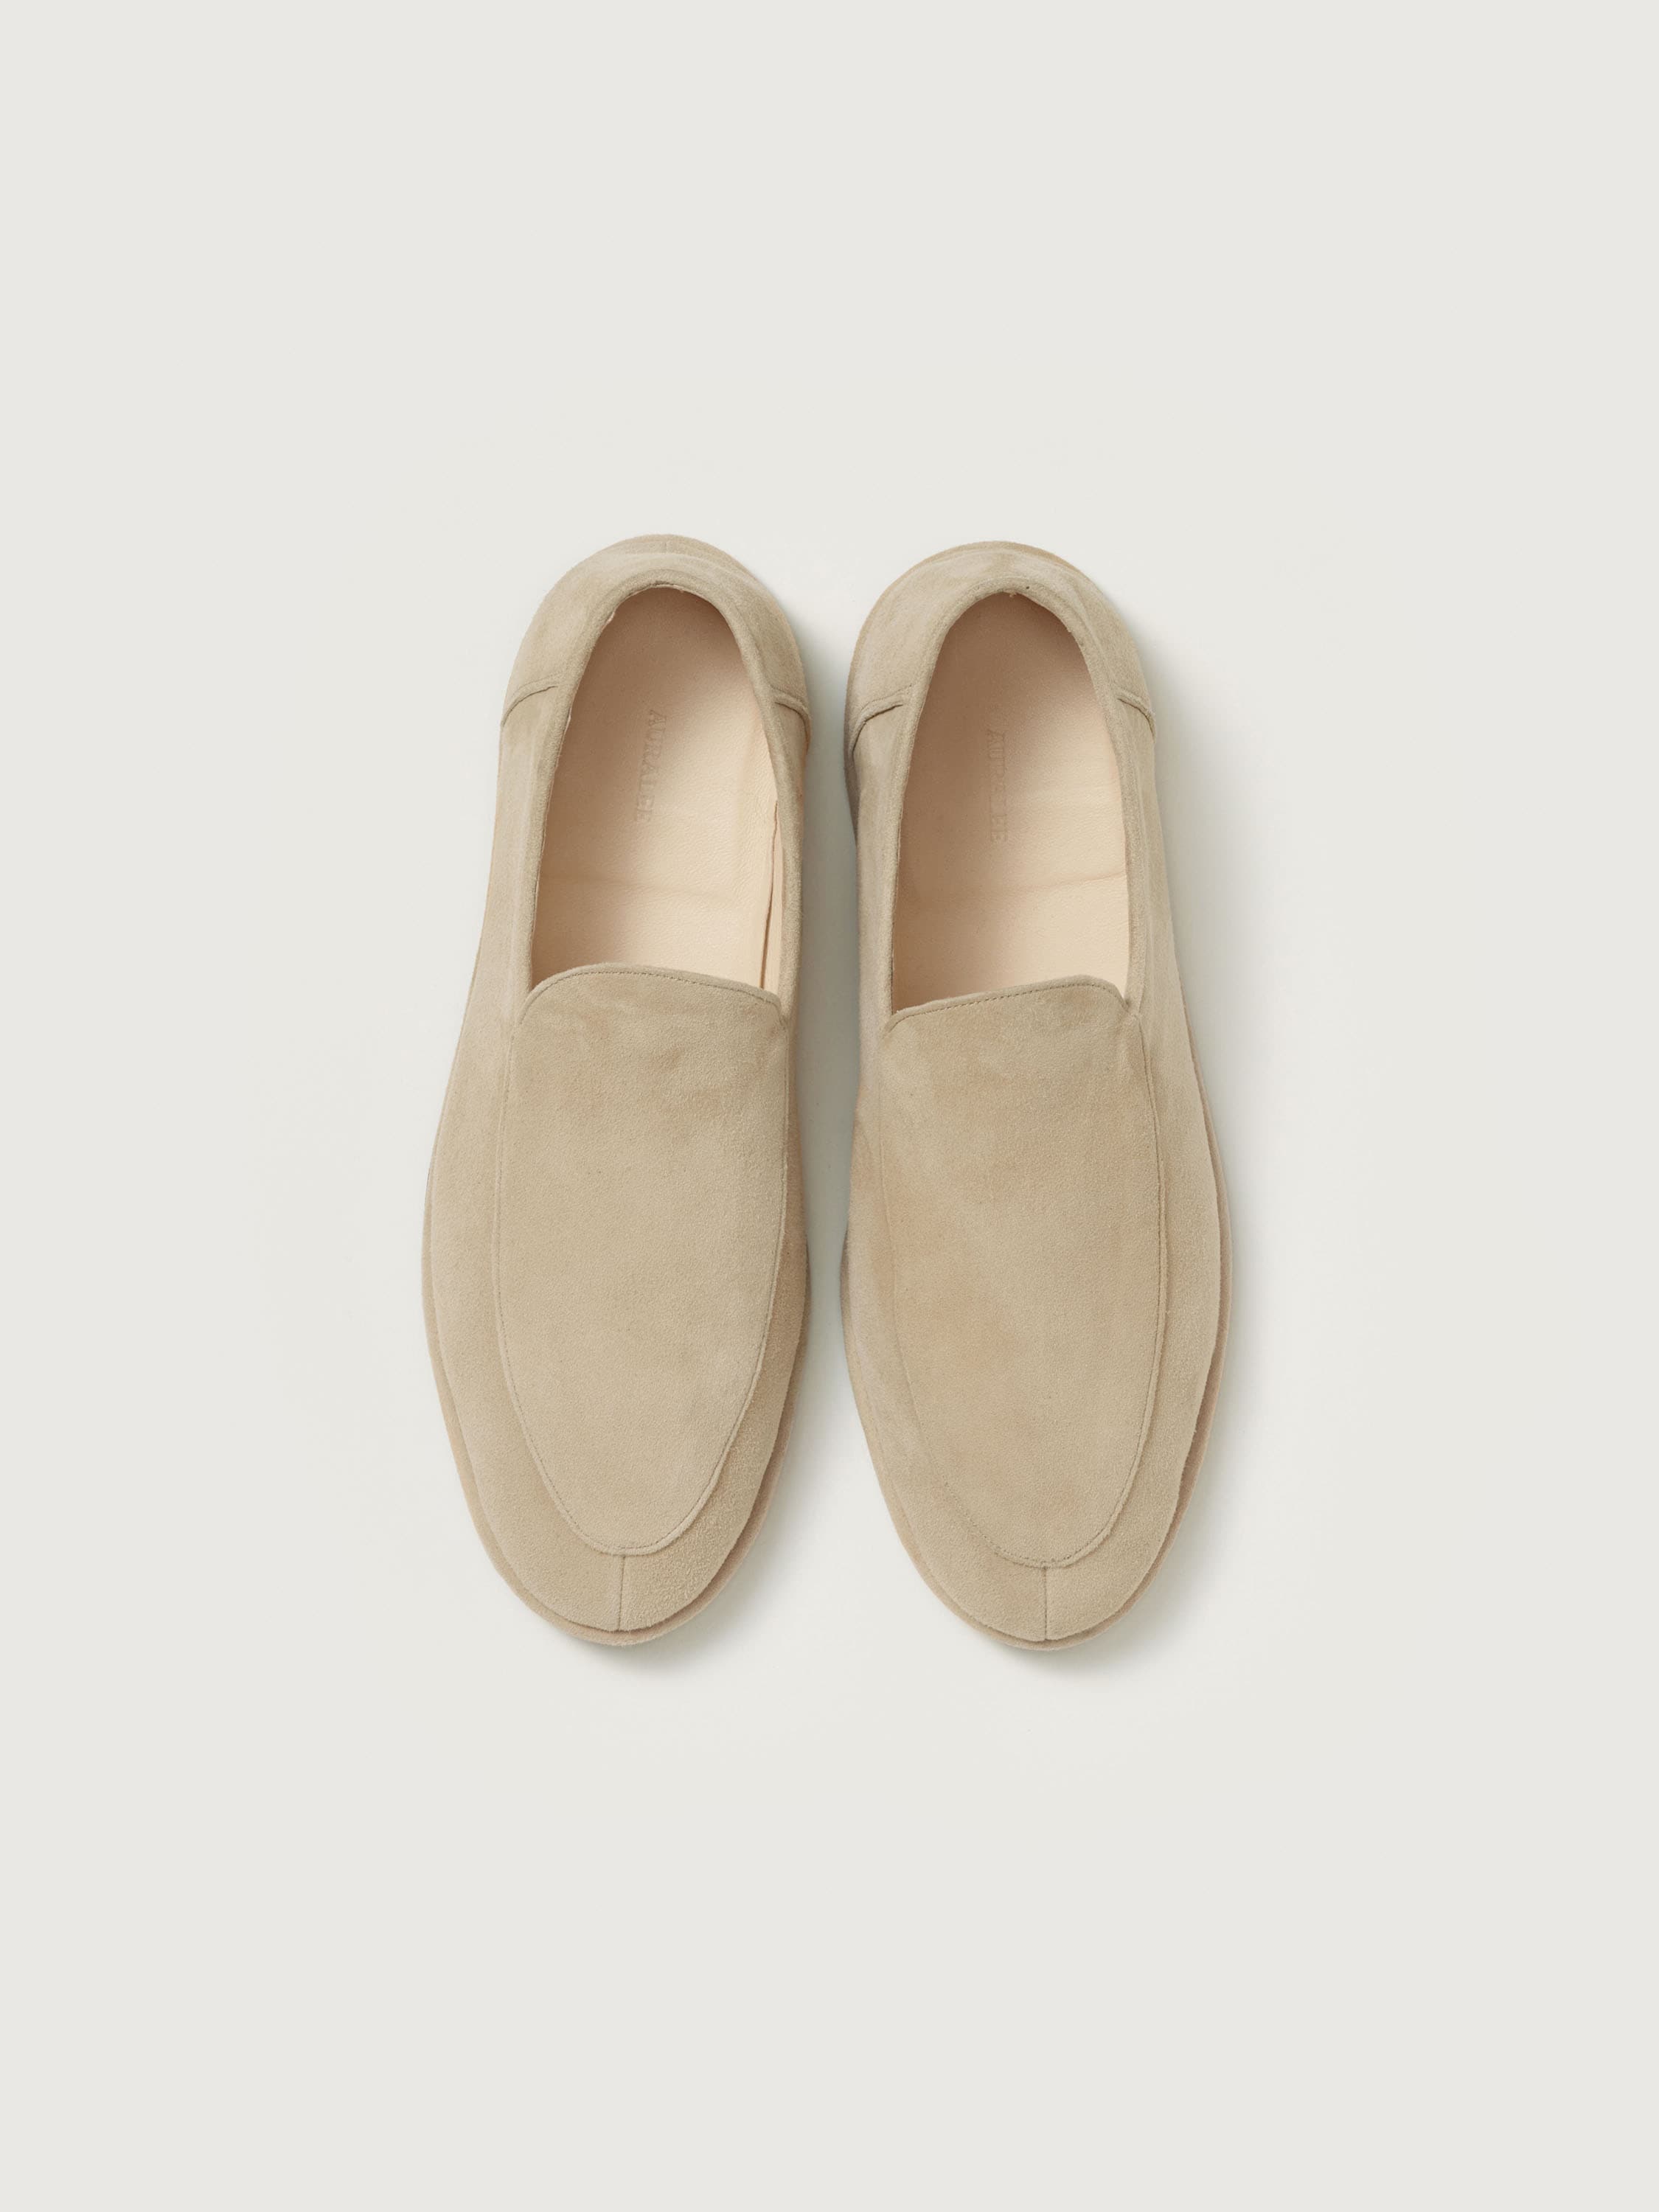 LEATHER SHOES 詳細画像 BEIGE SUEDE 2